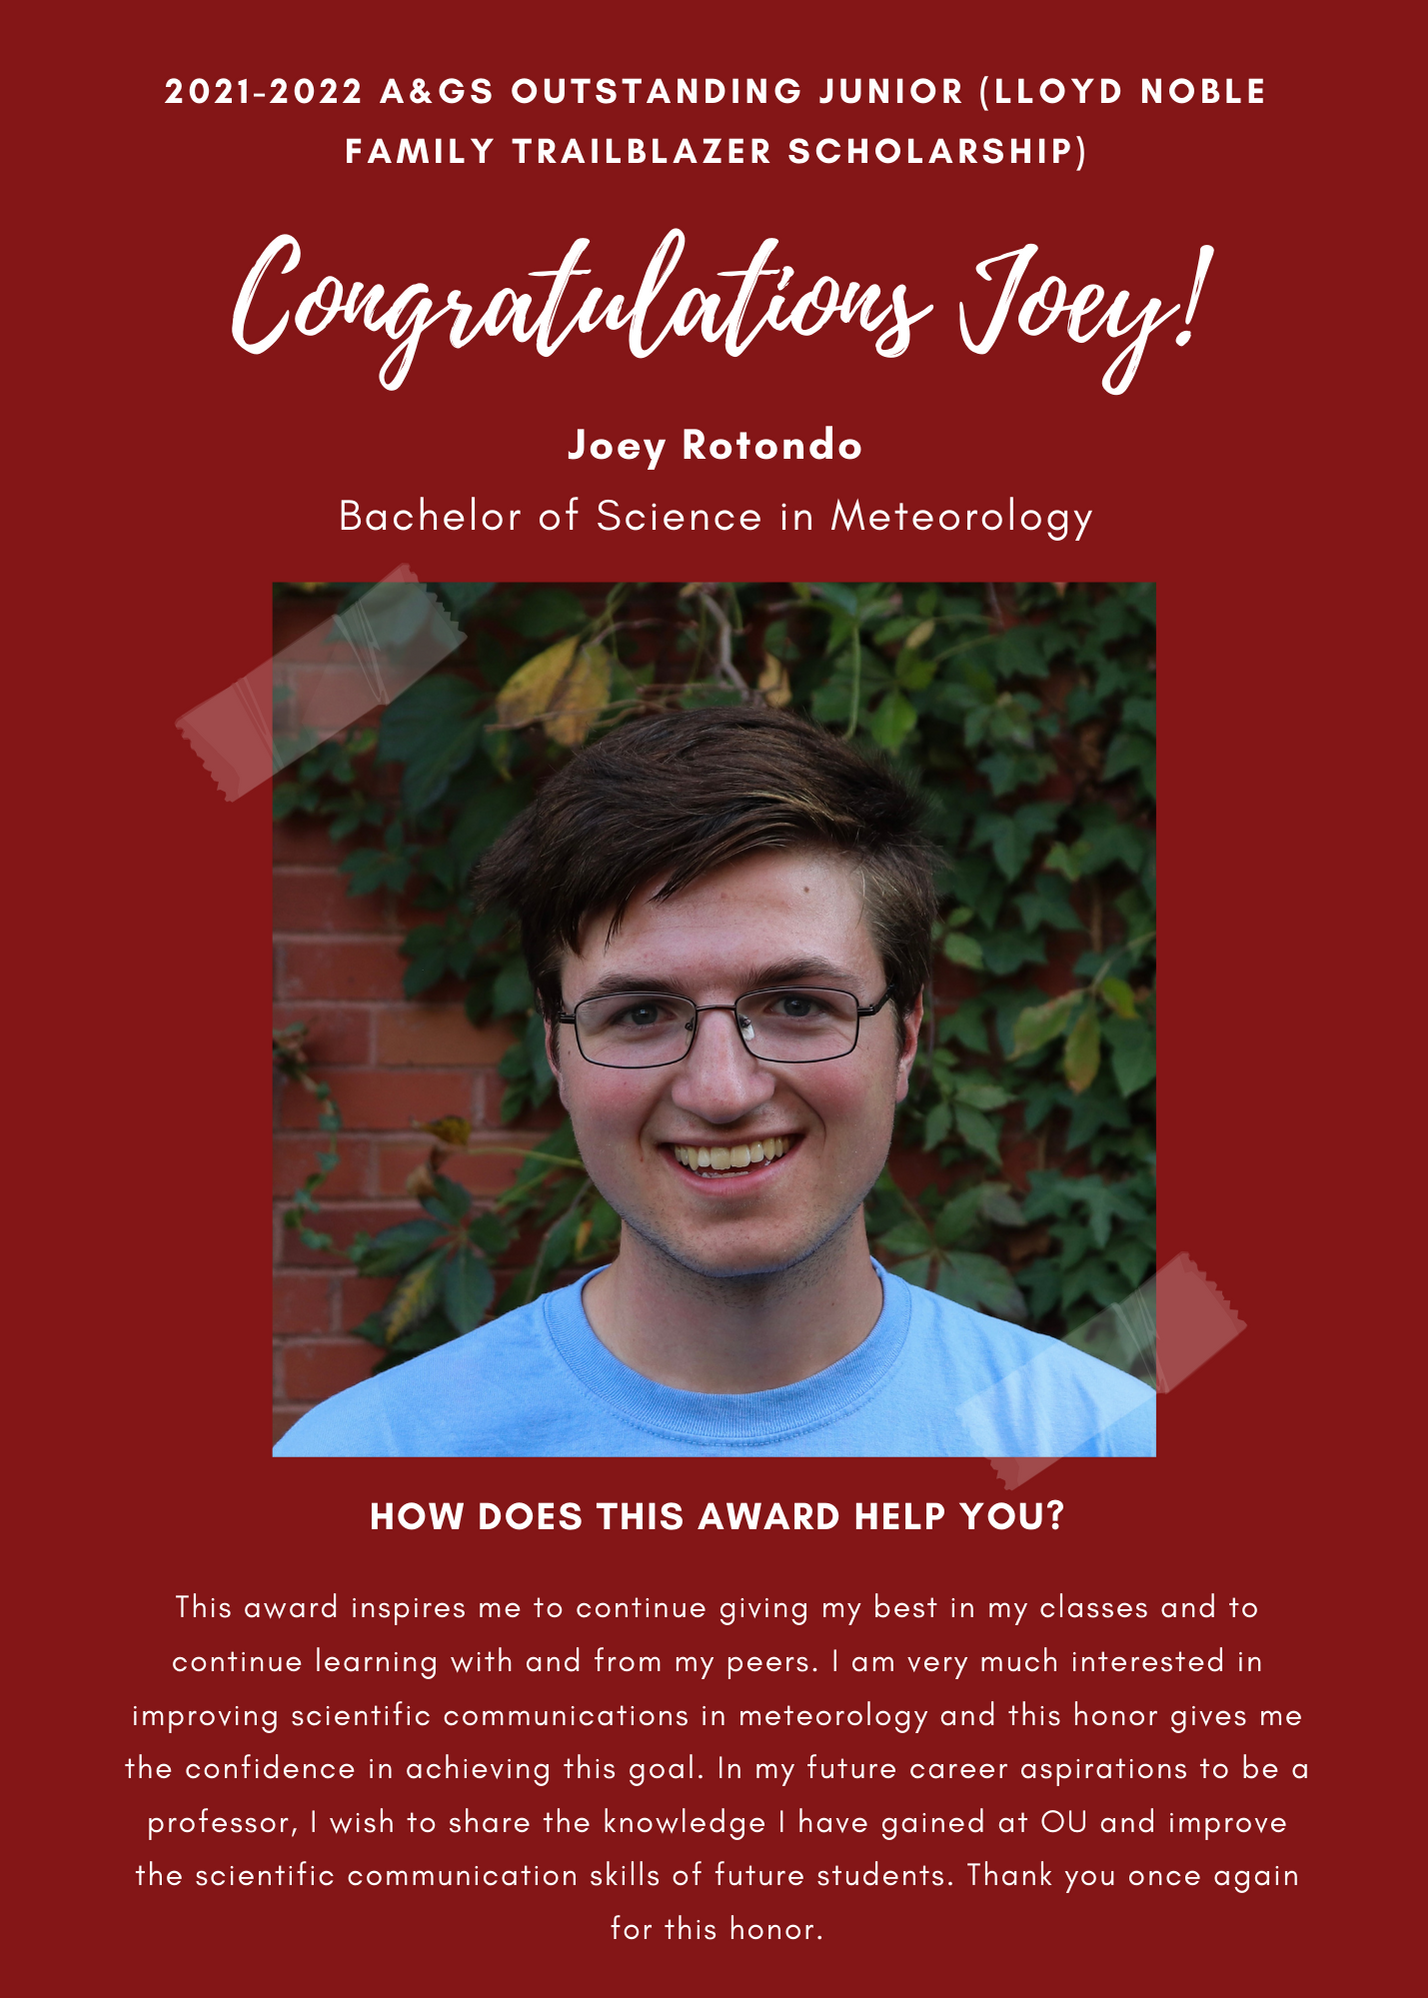 2021 -2022 A&GS Outstanding Junior (Lloyd Noble Family Trailblazer Scholarship) Congratulations Joey! Joey Rotondo Bachelor of Science in Meteorology. How does this award help you? This award inspires me to continue giving my best in my classes and to continue learning with and from my peers. I am very much intersted in improving scientific communications in meteorology and this honor gives me the confidence in achieving this goal. in my future career aspirations to be a professor, I wish to share the knowledge I have gained at OU and improve the scientific cimmunicatuioin skills of future students. Thank you once again for this honor.